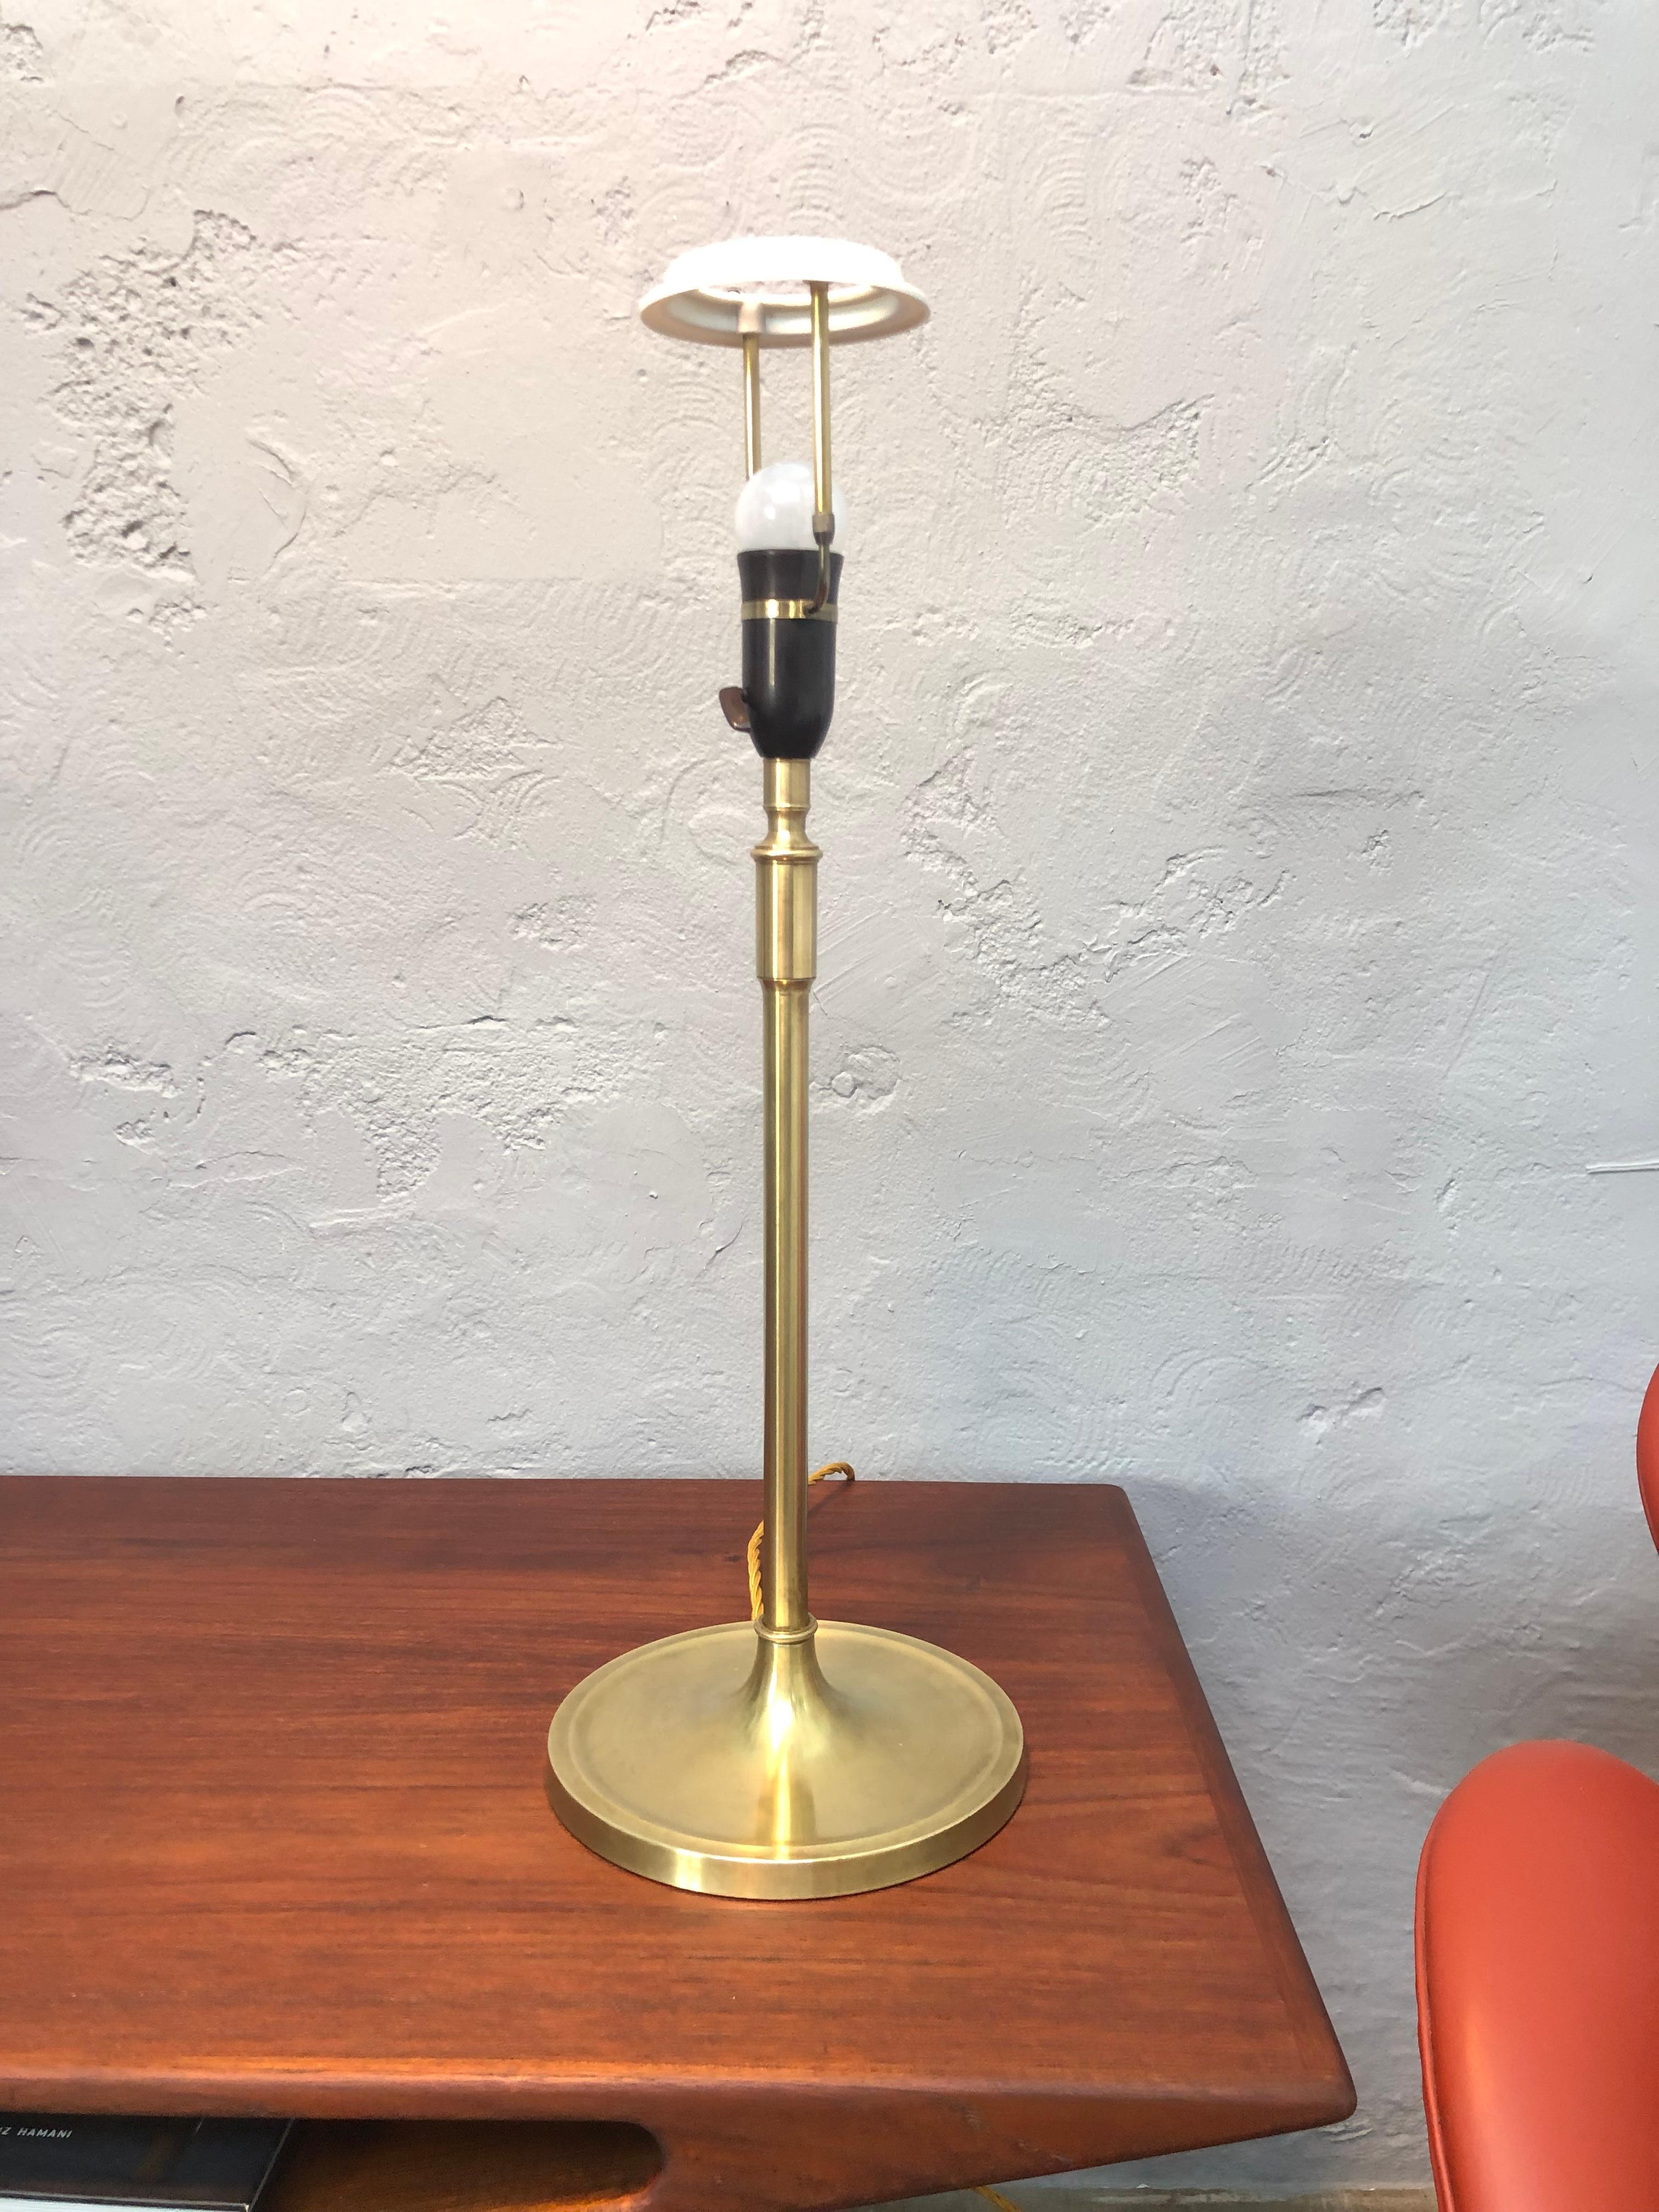 Mid-20th Century Vintage Pair of Brass Table Lamps by Esben Klint for Le Klint from the 1950s For Sale